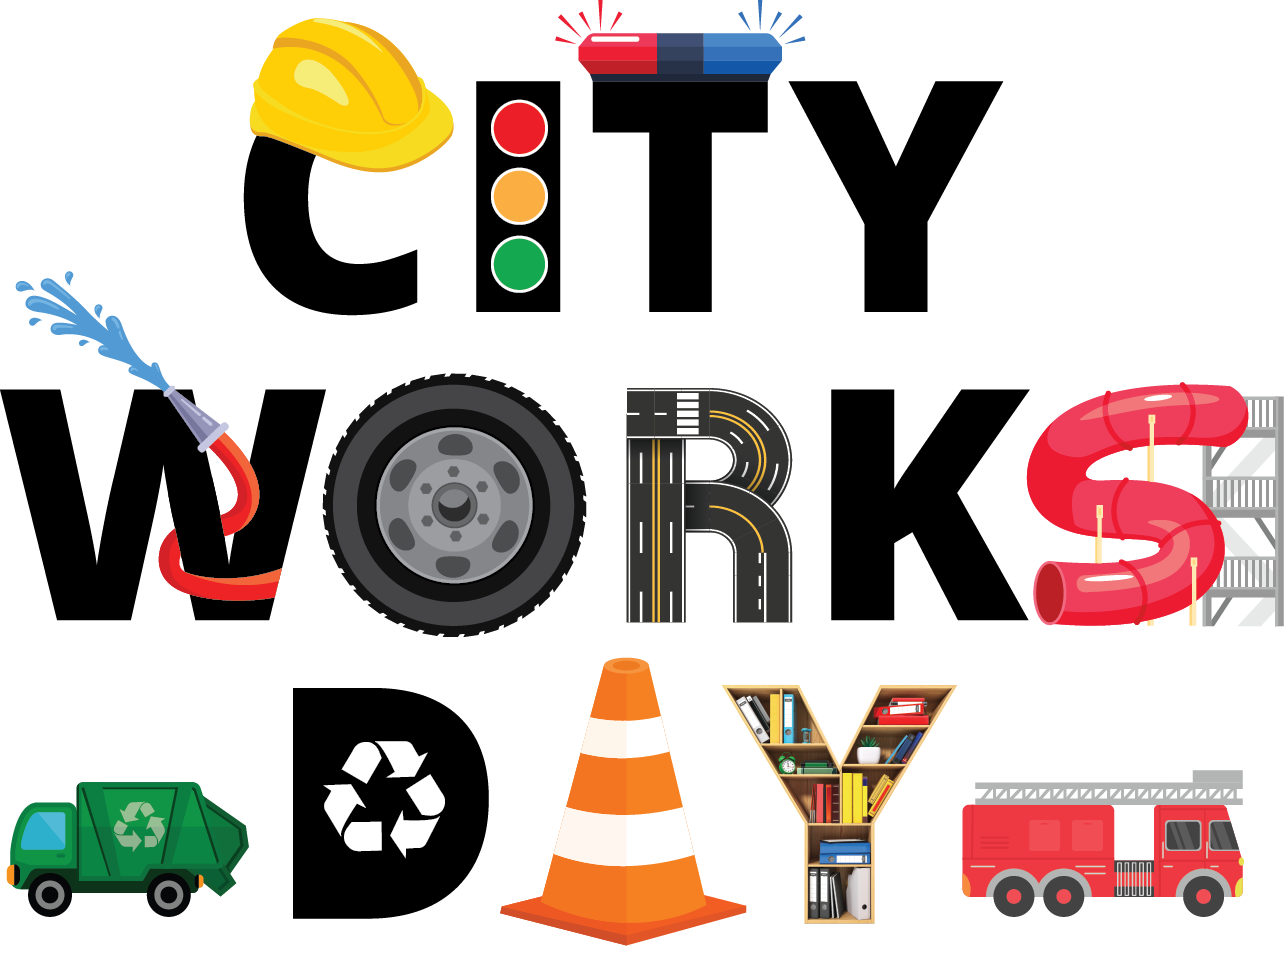 City Works Day Logo includes animations of a garbage truck and firetruck